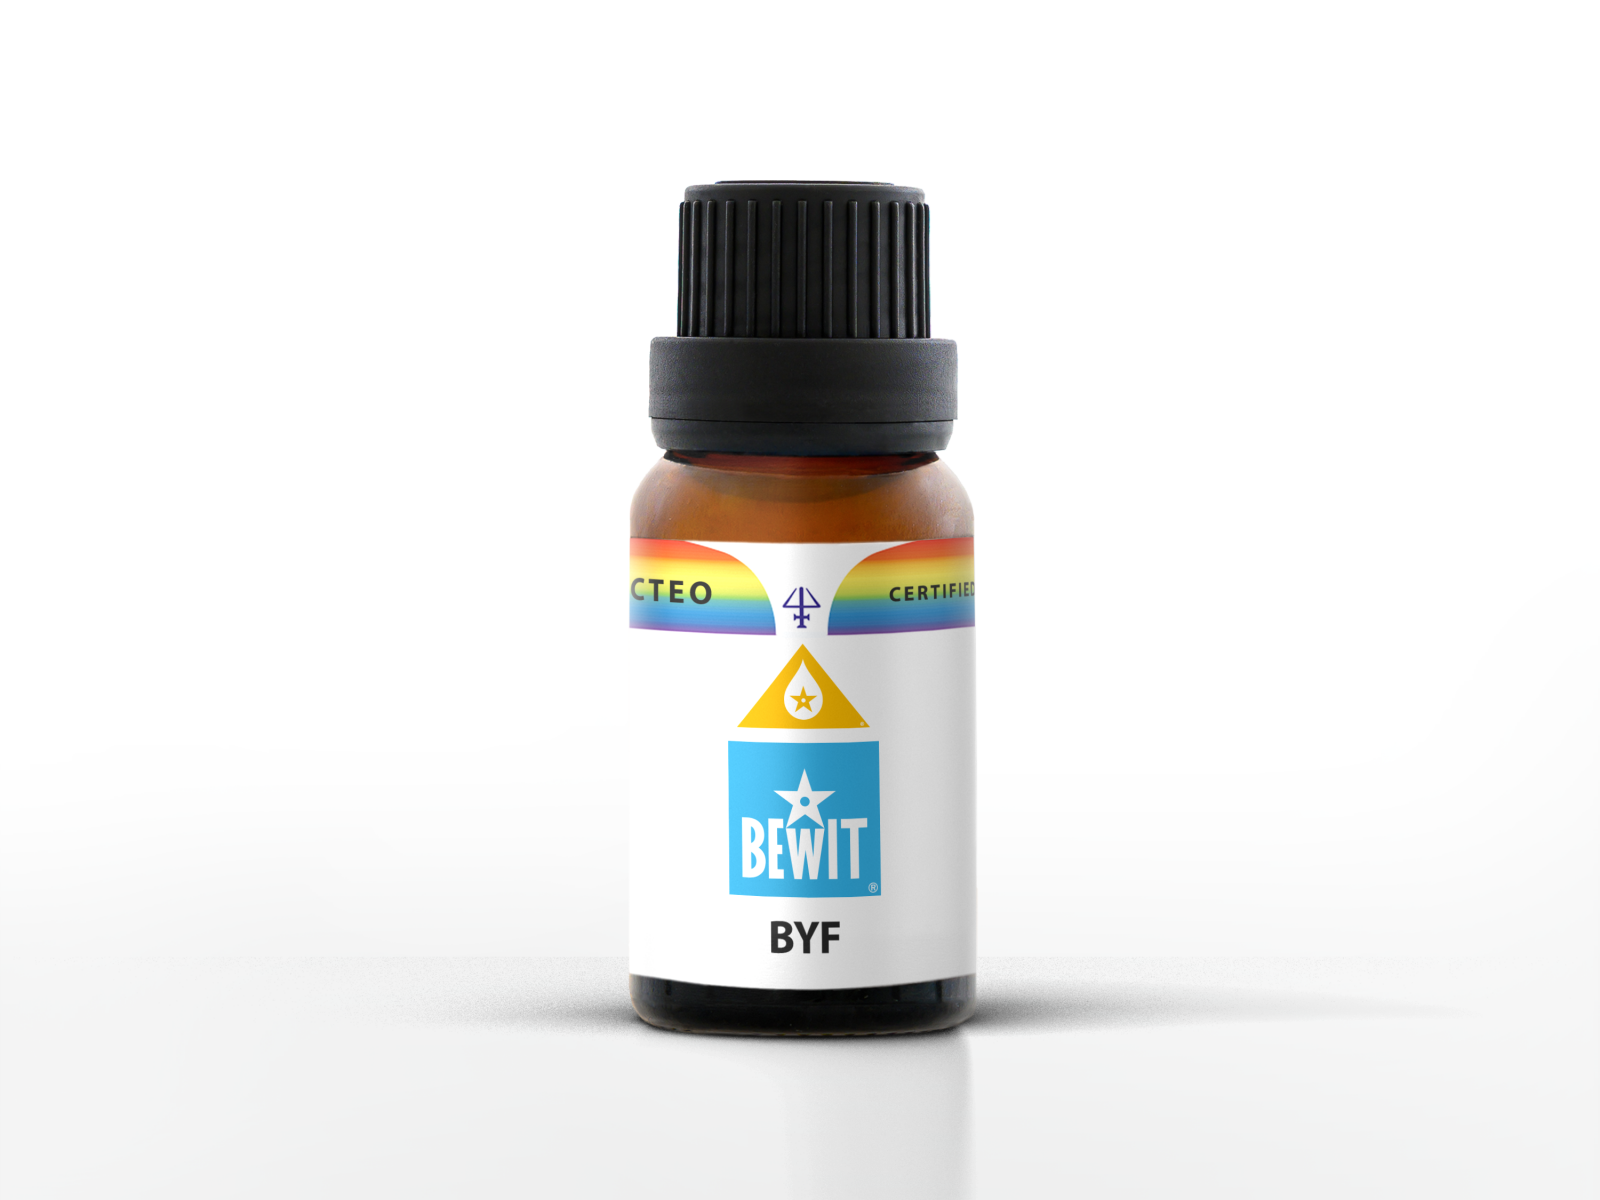 BEWIT BYF - Blend of essential oils